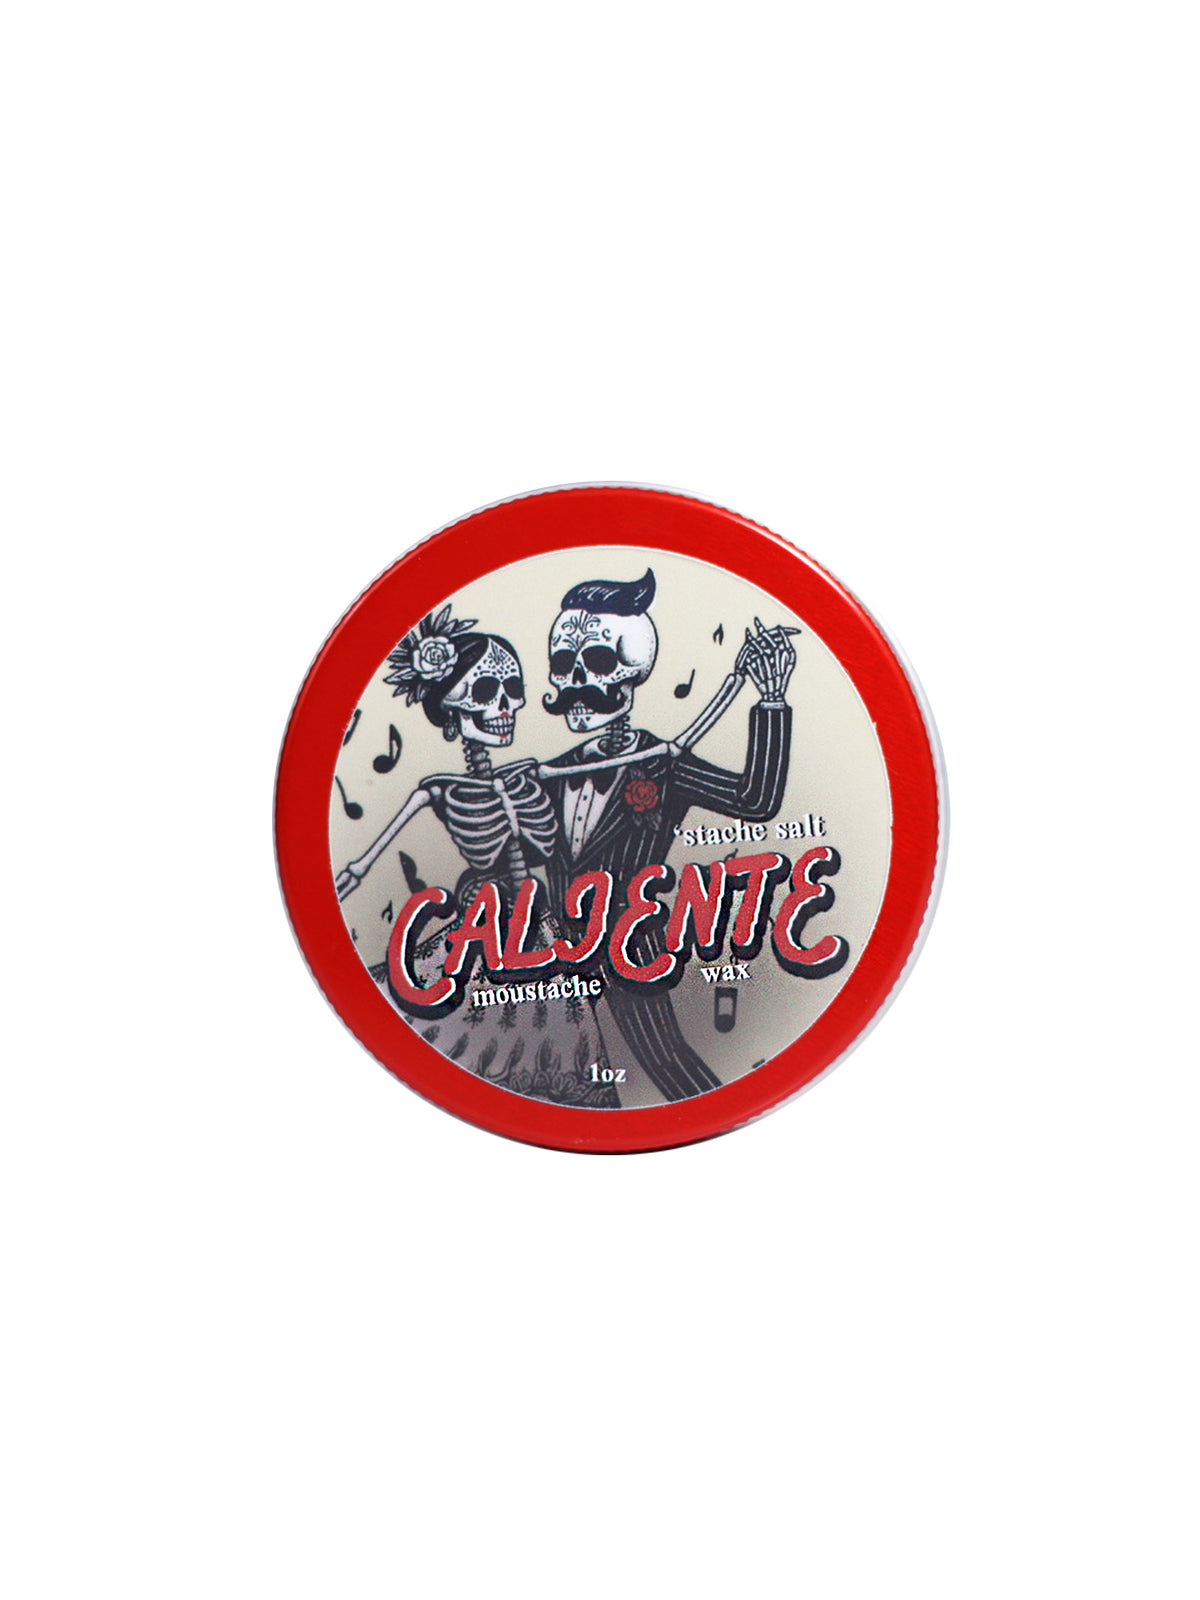 Caliente Moustache Wax - Strong Hold